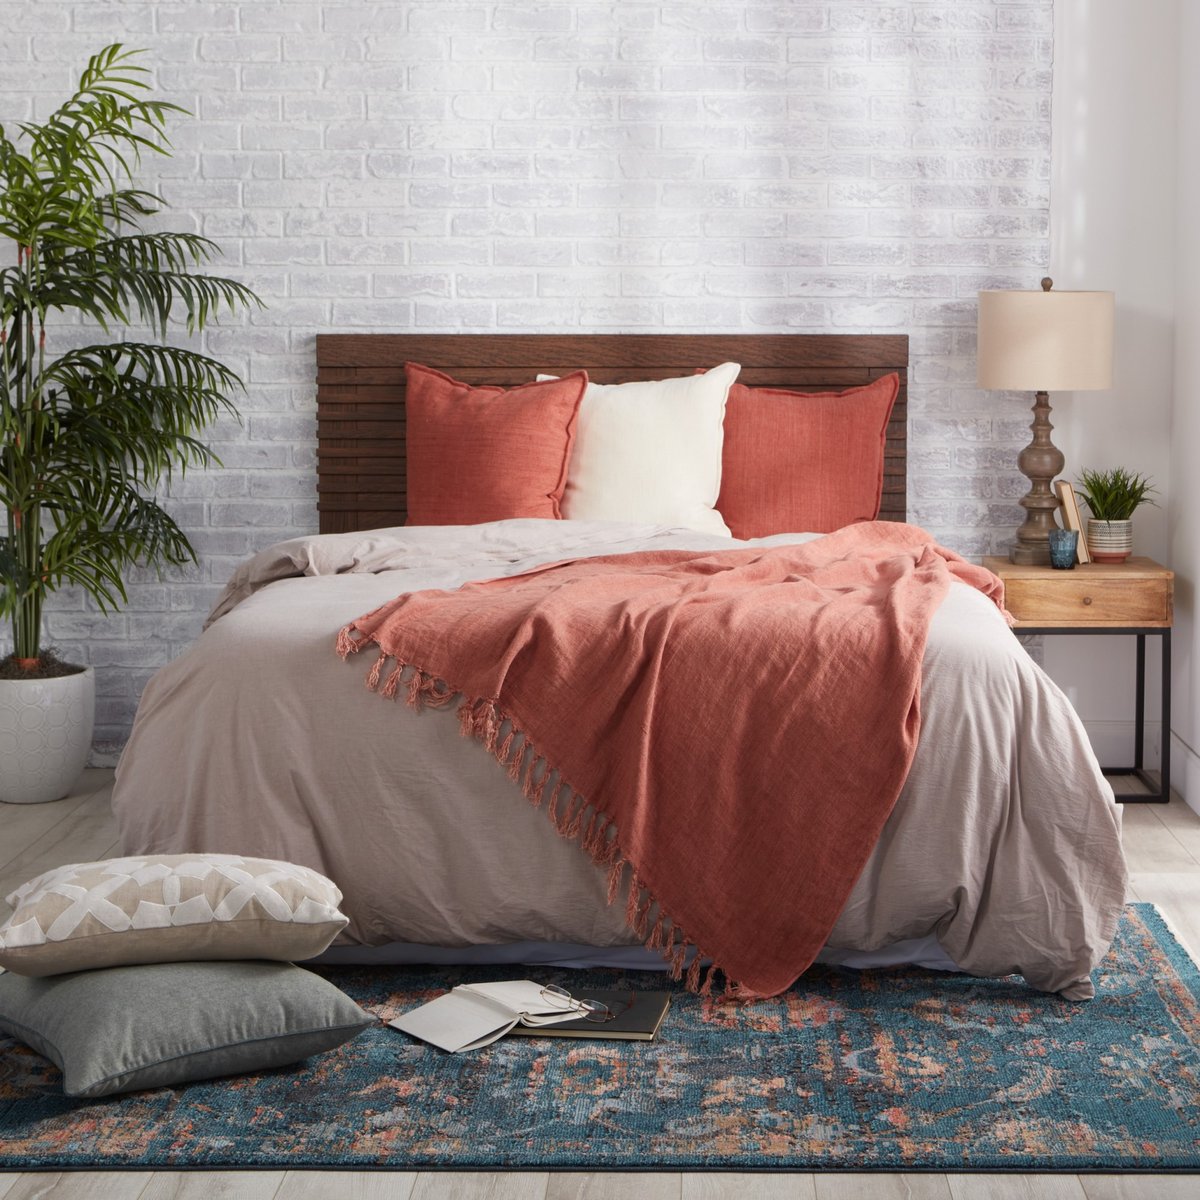 Gender Neutral With More Than Neutral Tones - Guest Bedroom Decor Ideas